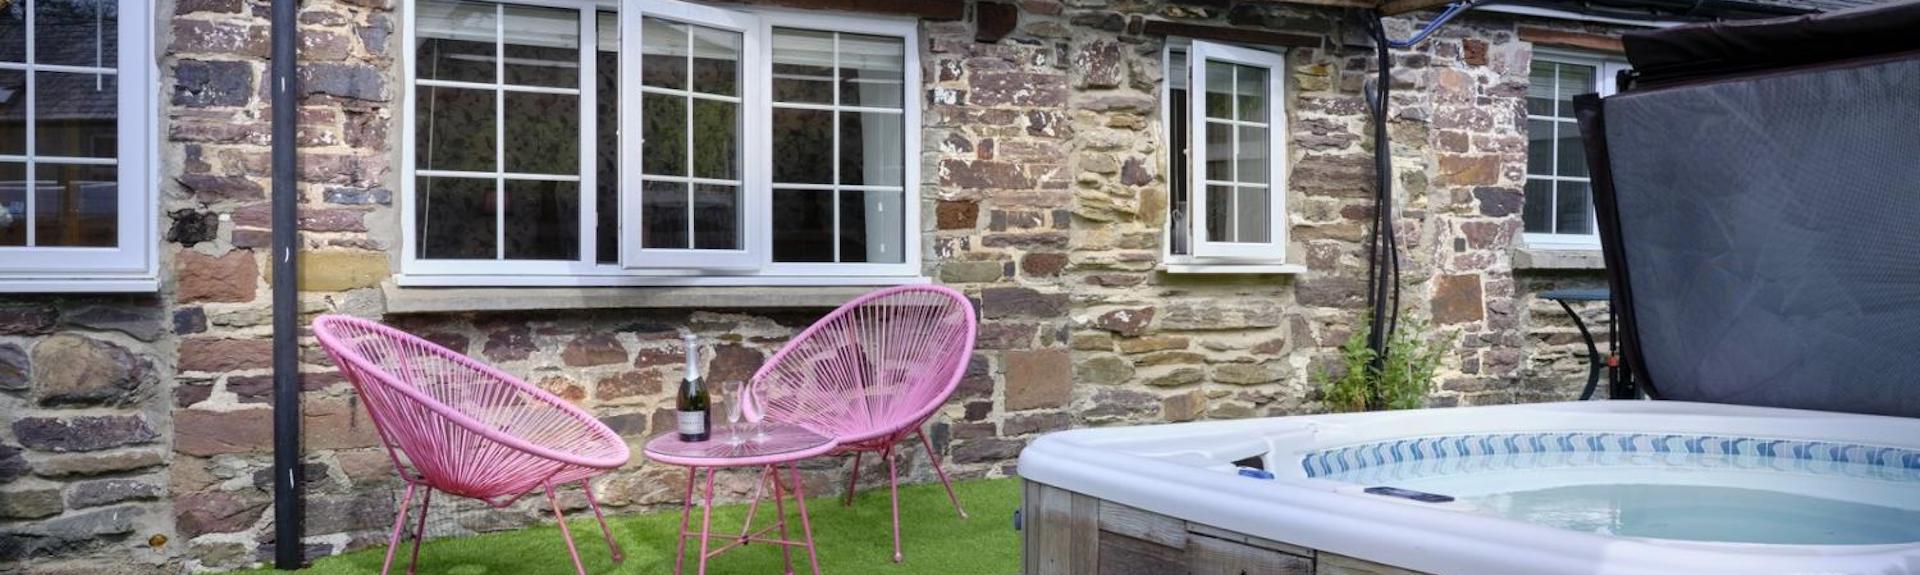 A stone-built Exmoor holiday cottage overlooks a lawn with a hot tub.